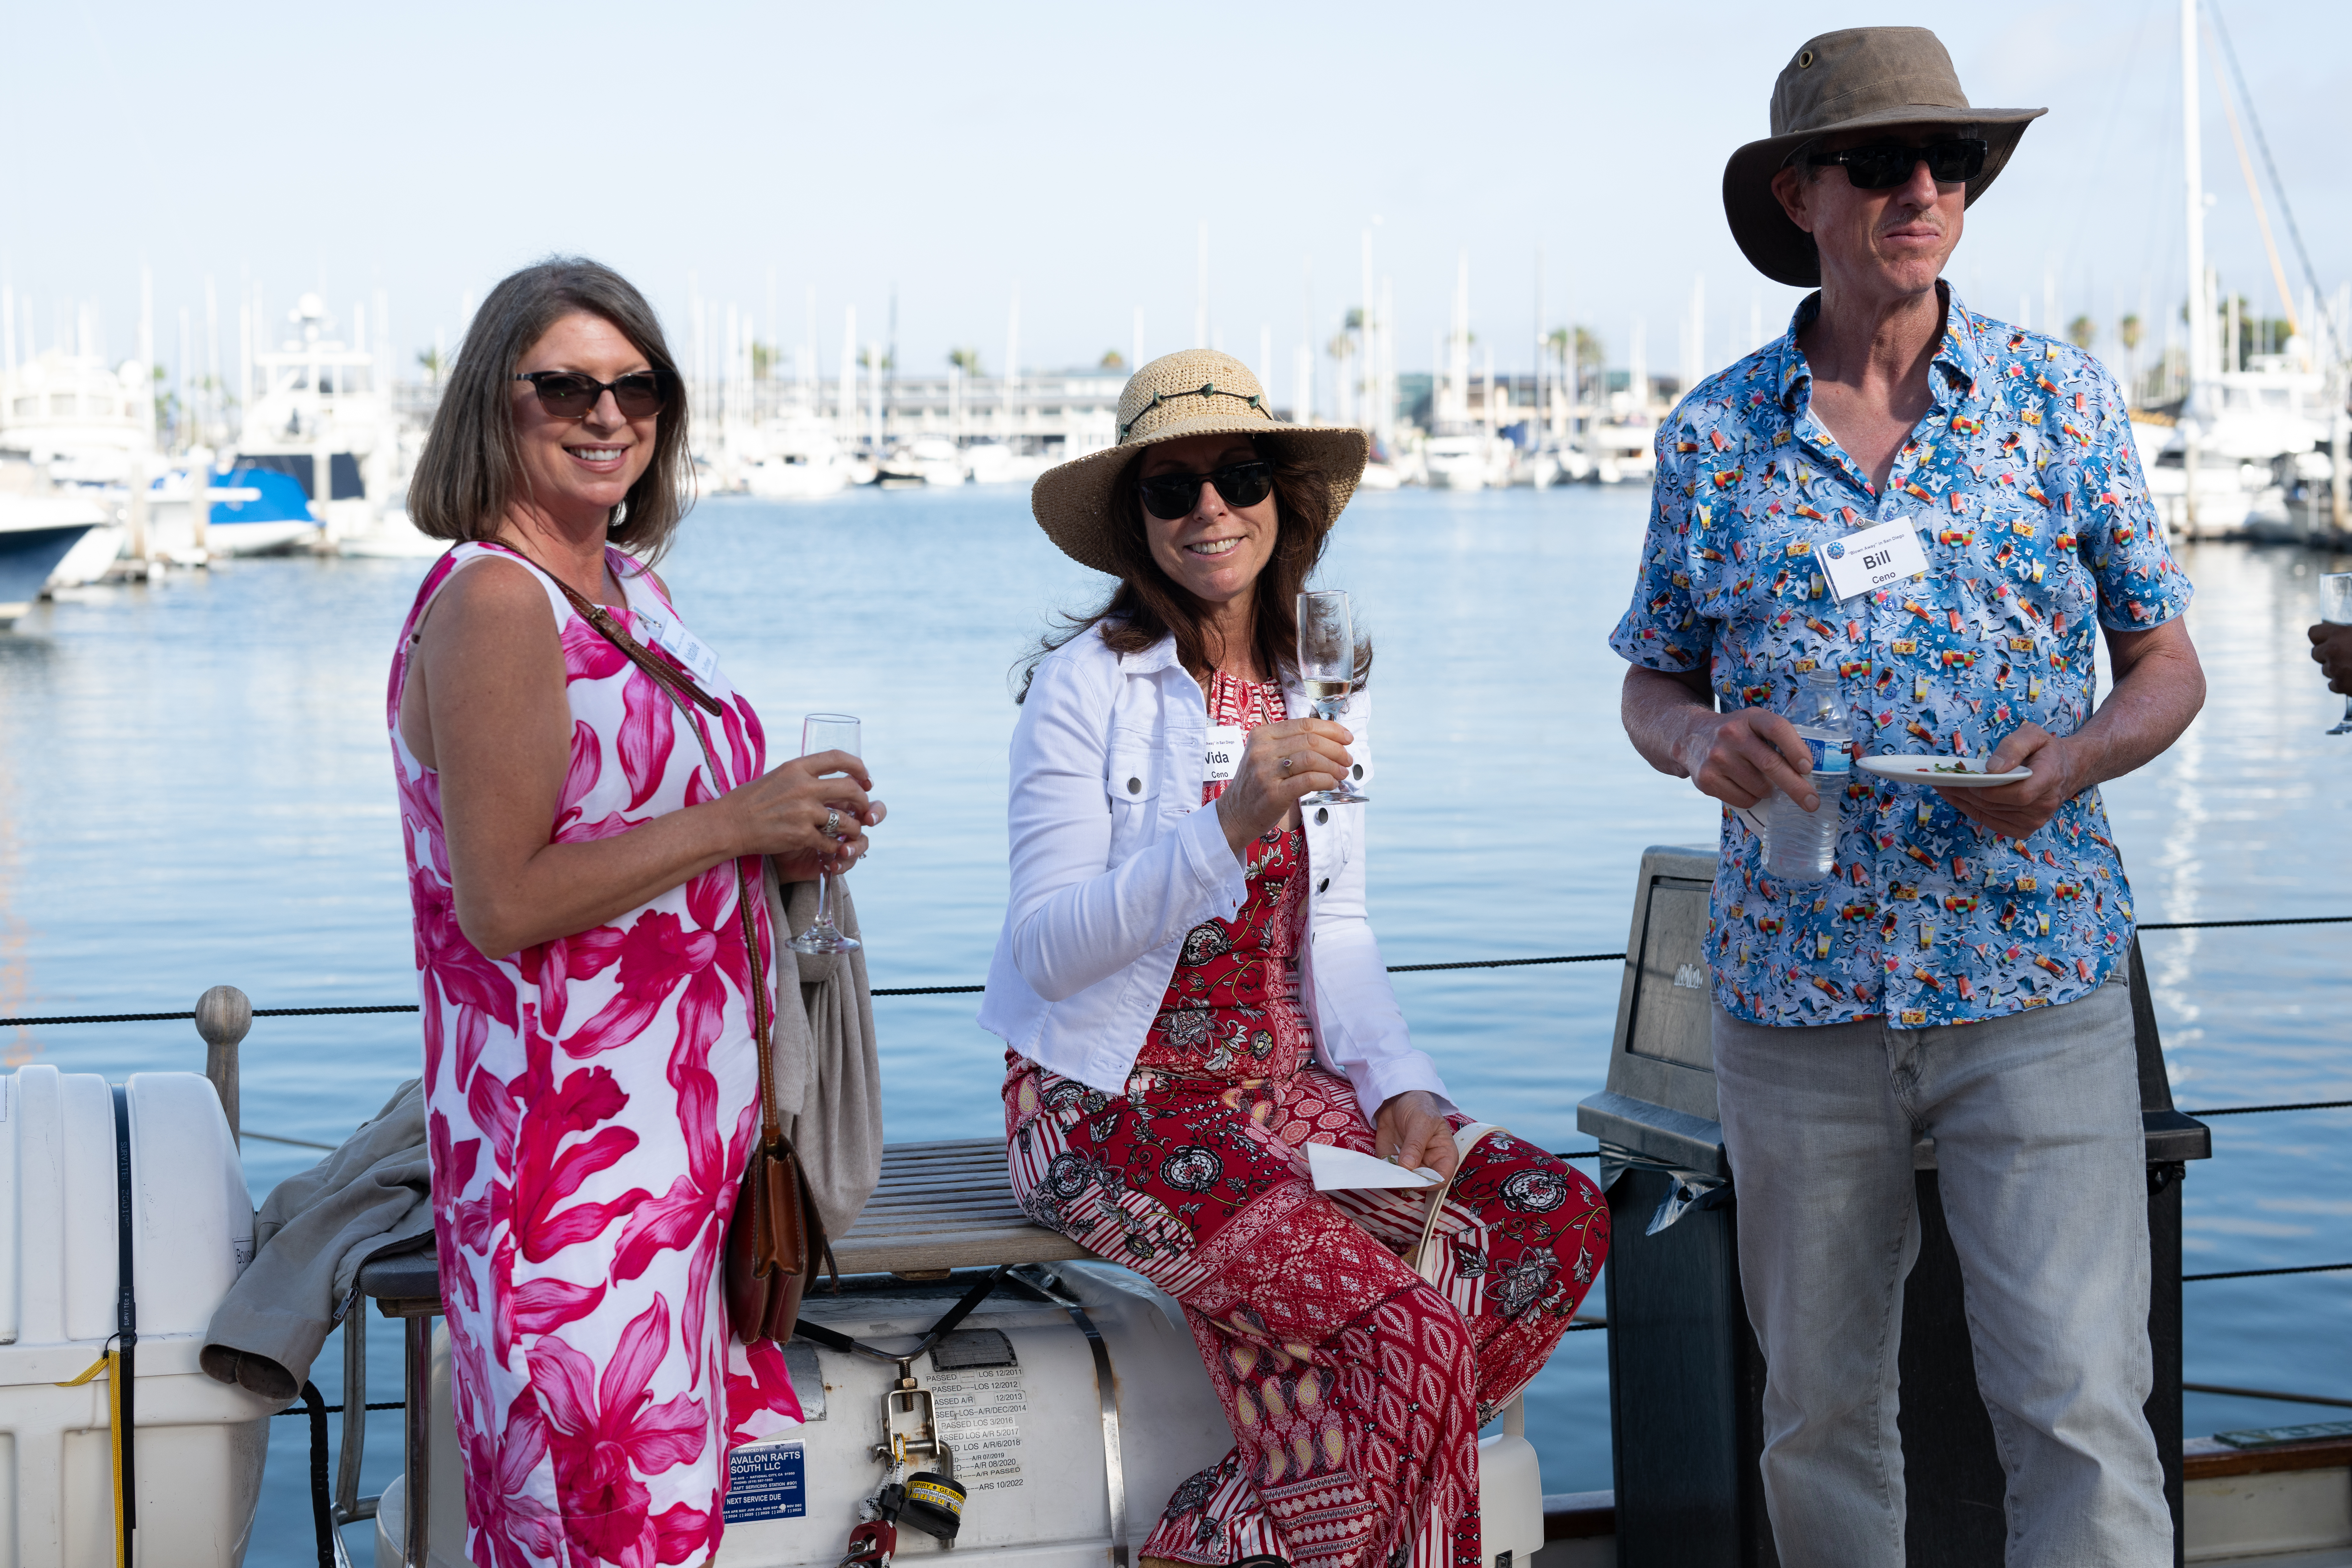 Guests were delighted with the views of the San Diego bay.